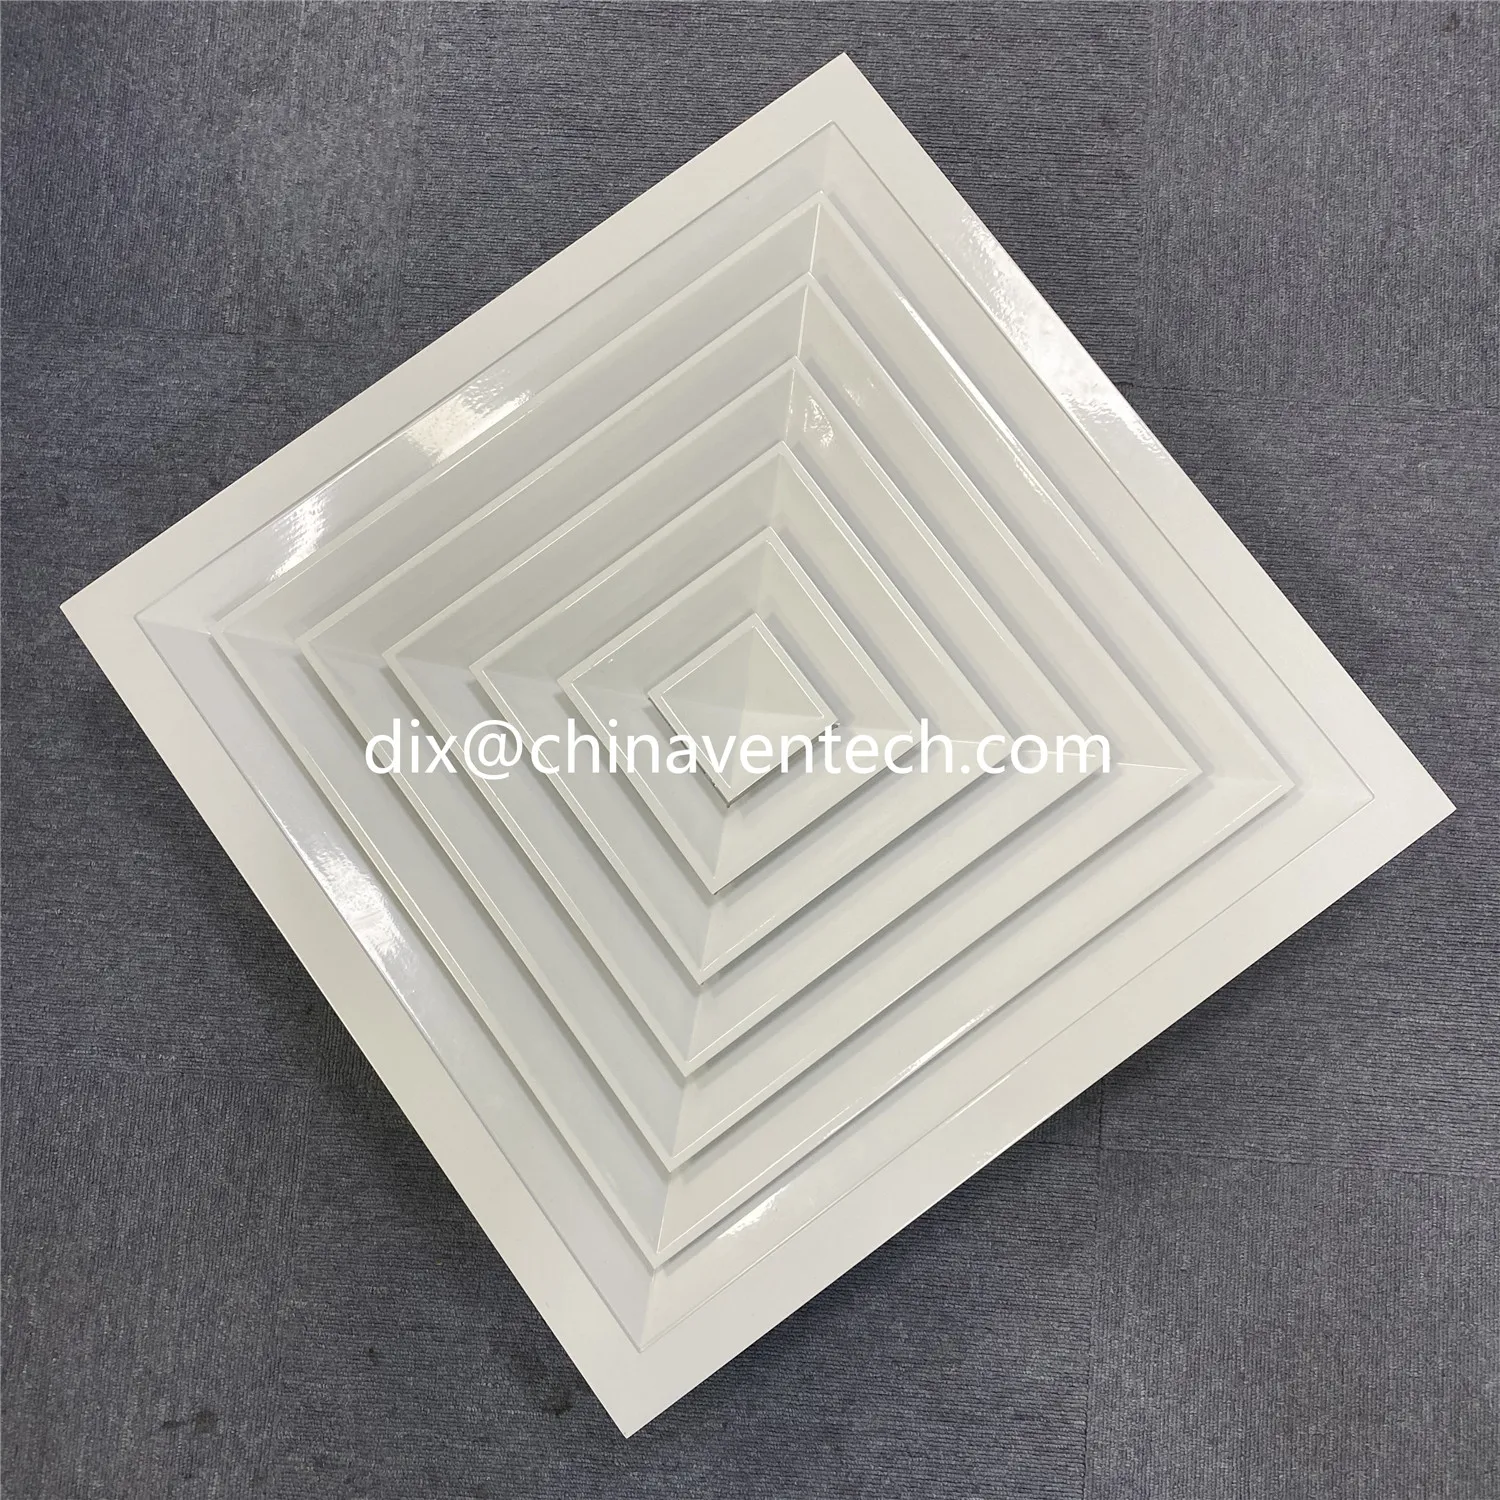 Philippines Style Aluminum 4 way Directional Square Ceiling Diffuser SCD-VB